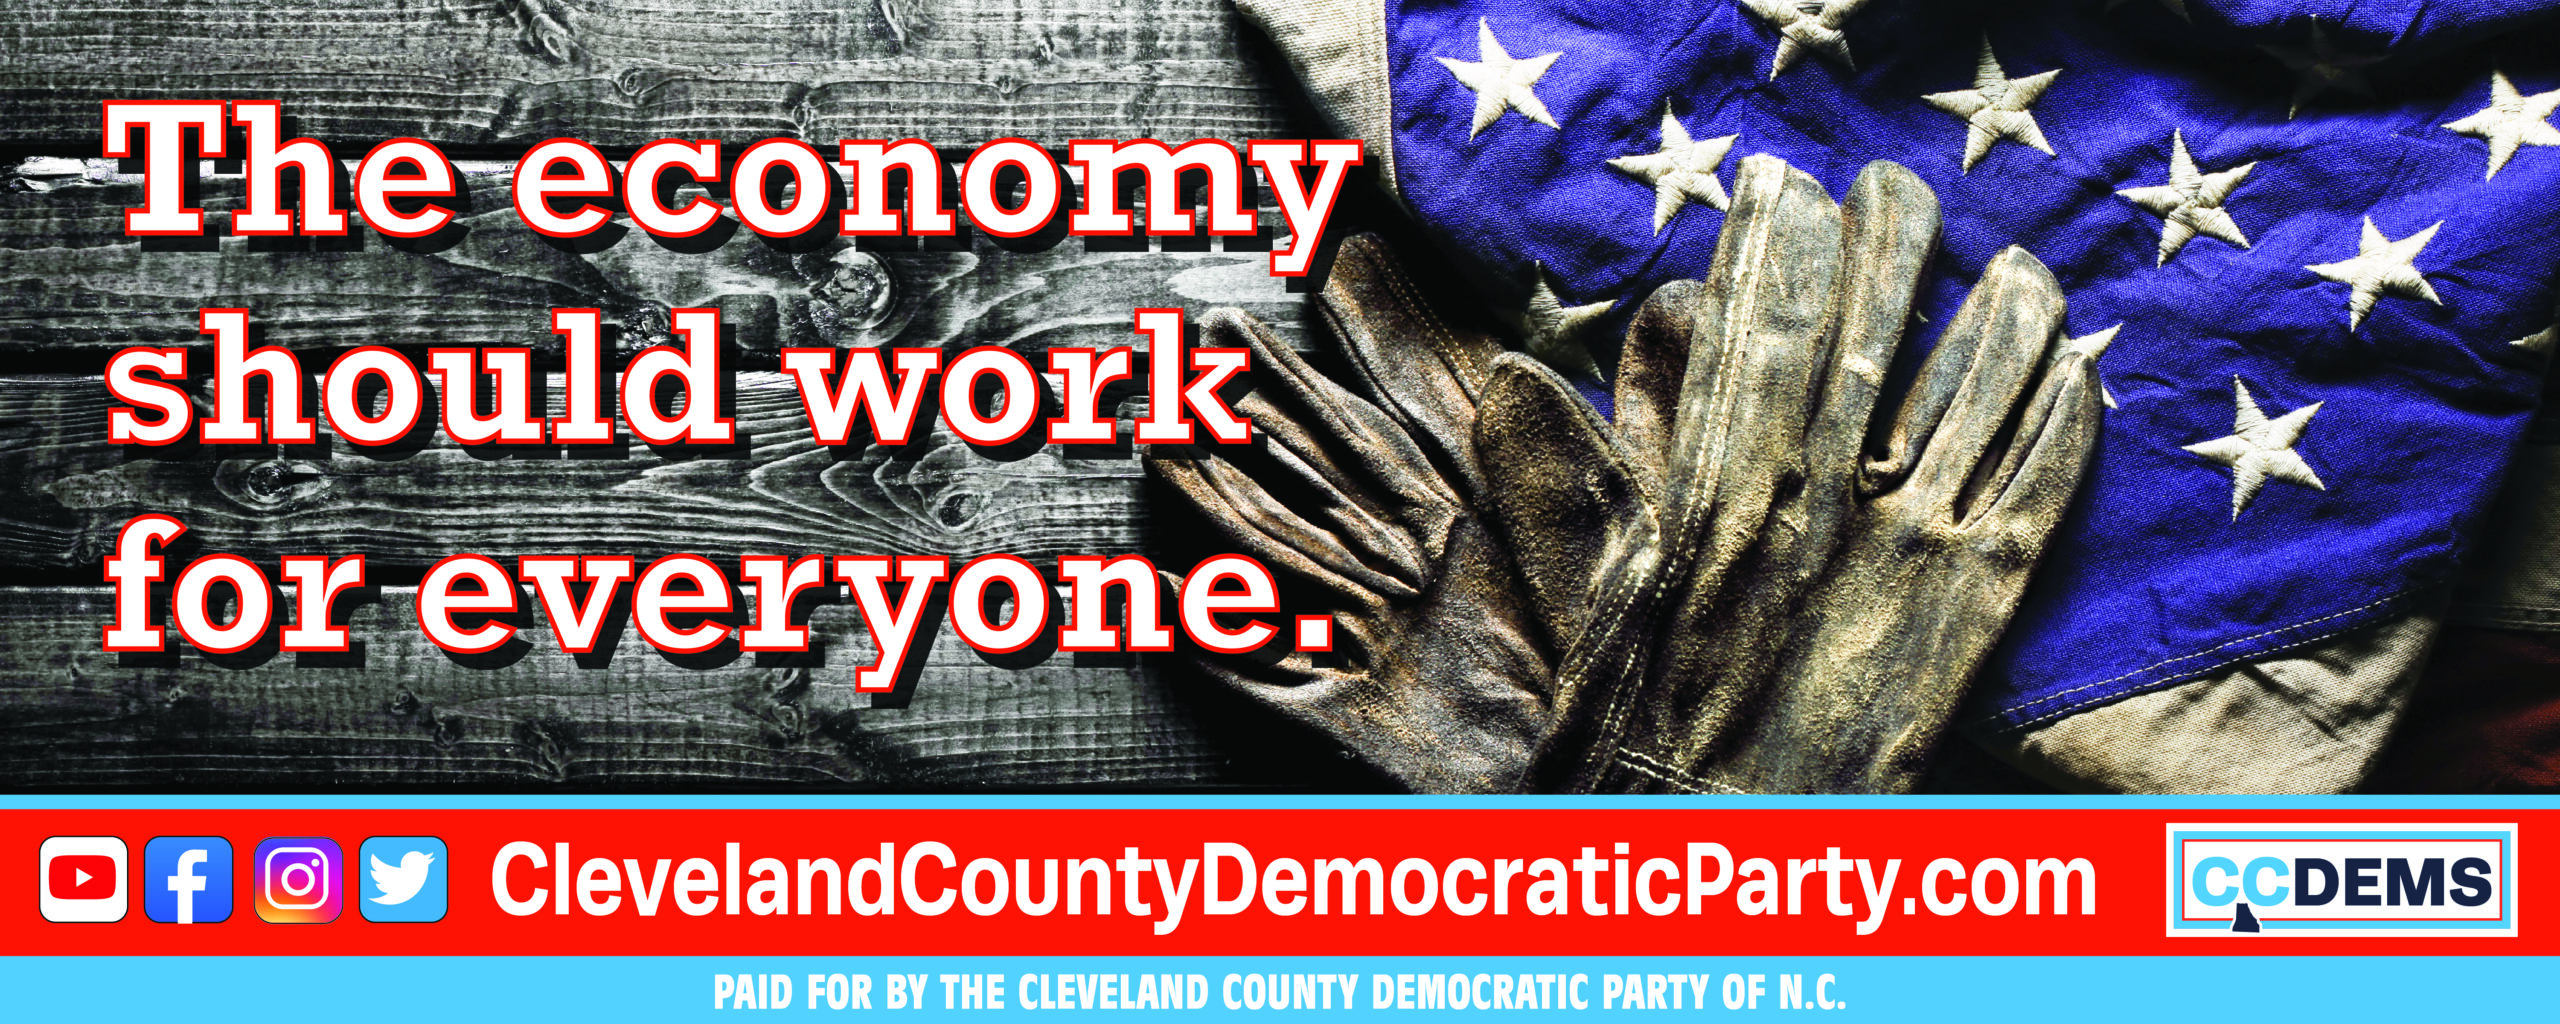 Traditional 8x20 Billboard: Economy Should Work for Everyone